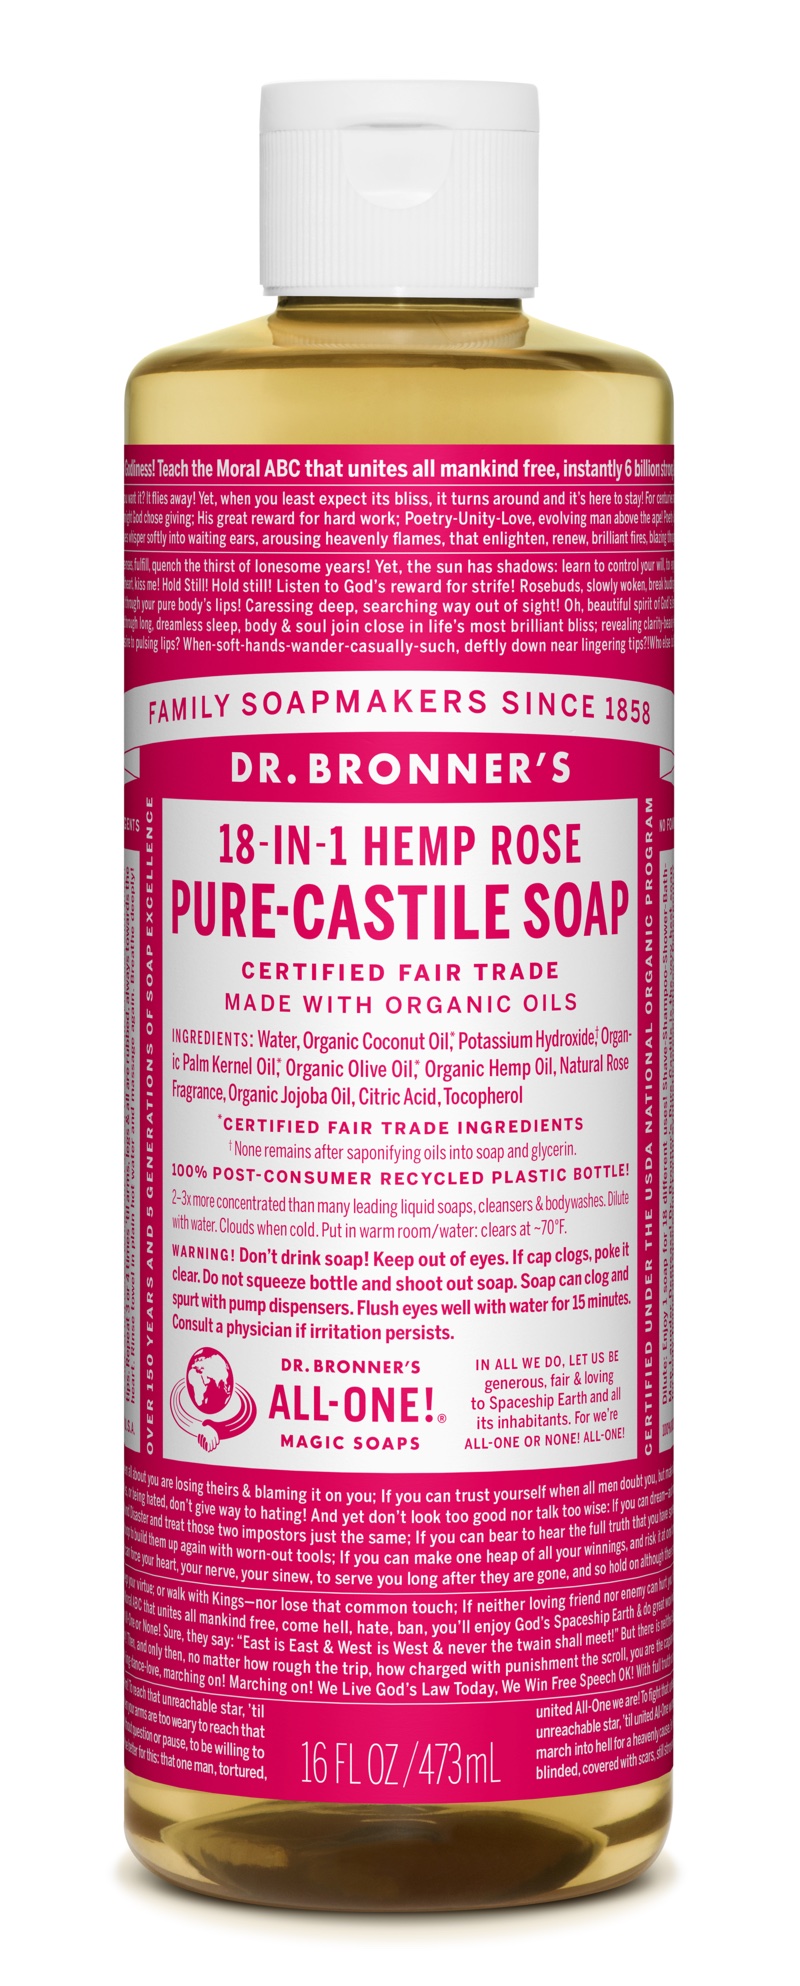 Dr Bronner's taps millennial market with Urban Outfitters deal